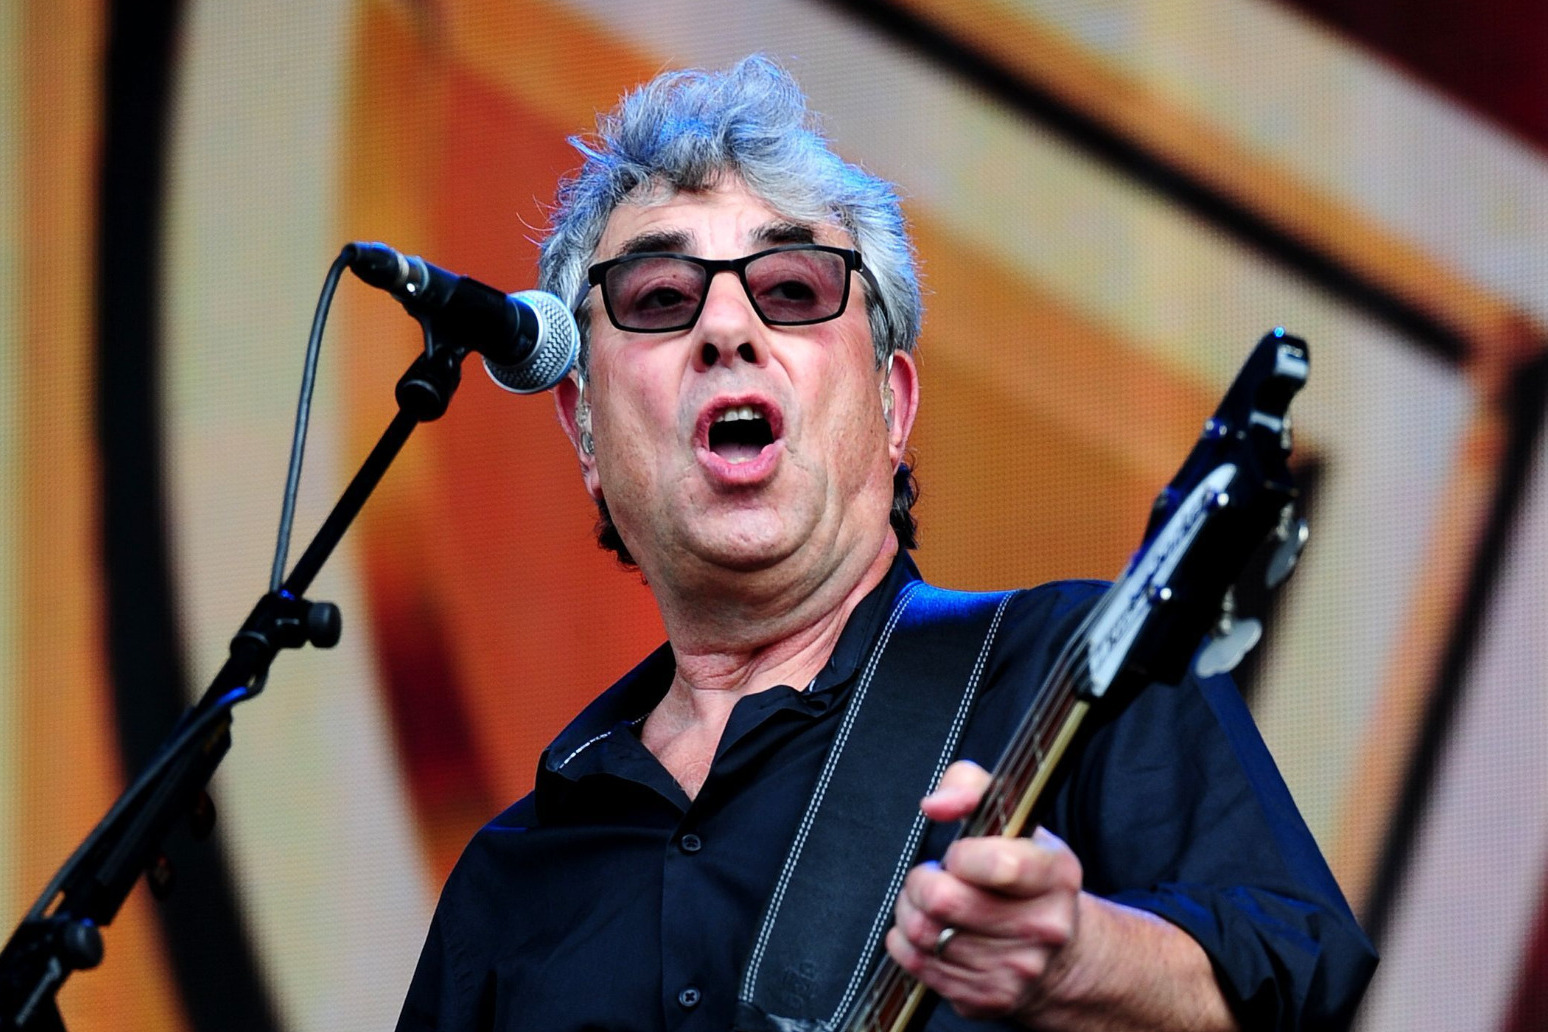 10cc star marking five decades in the band says ‘we never set out to make hits’ 